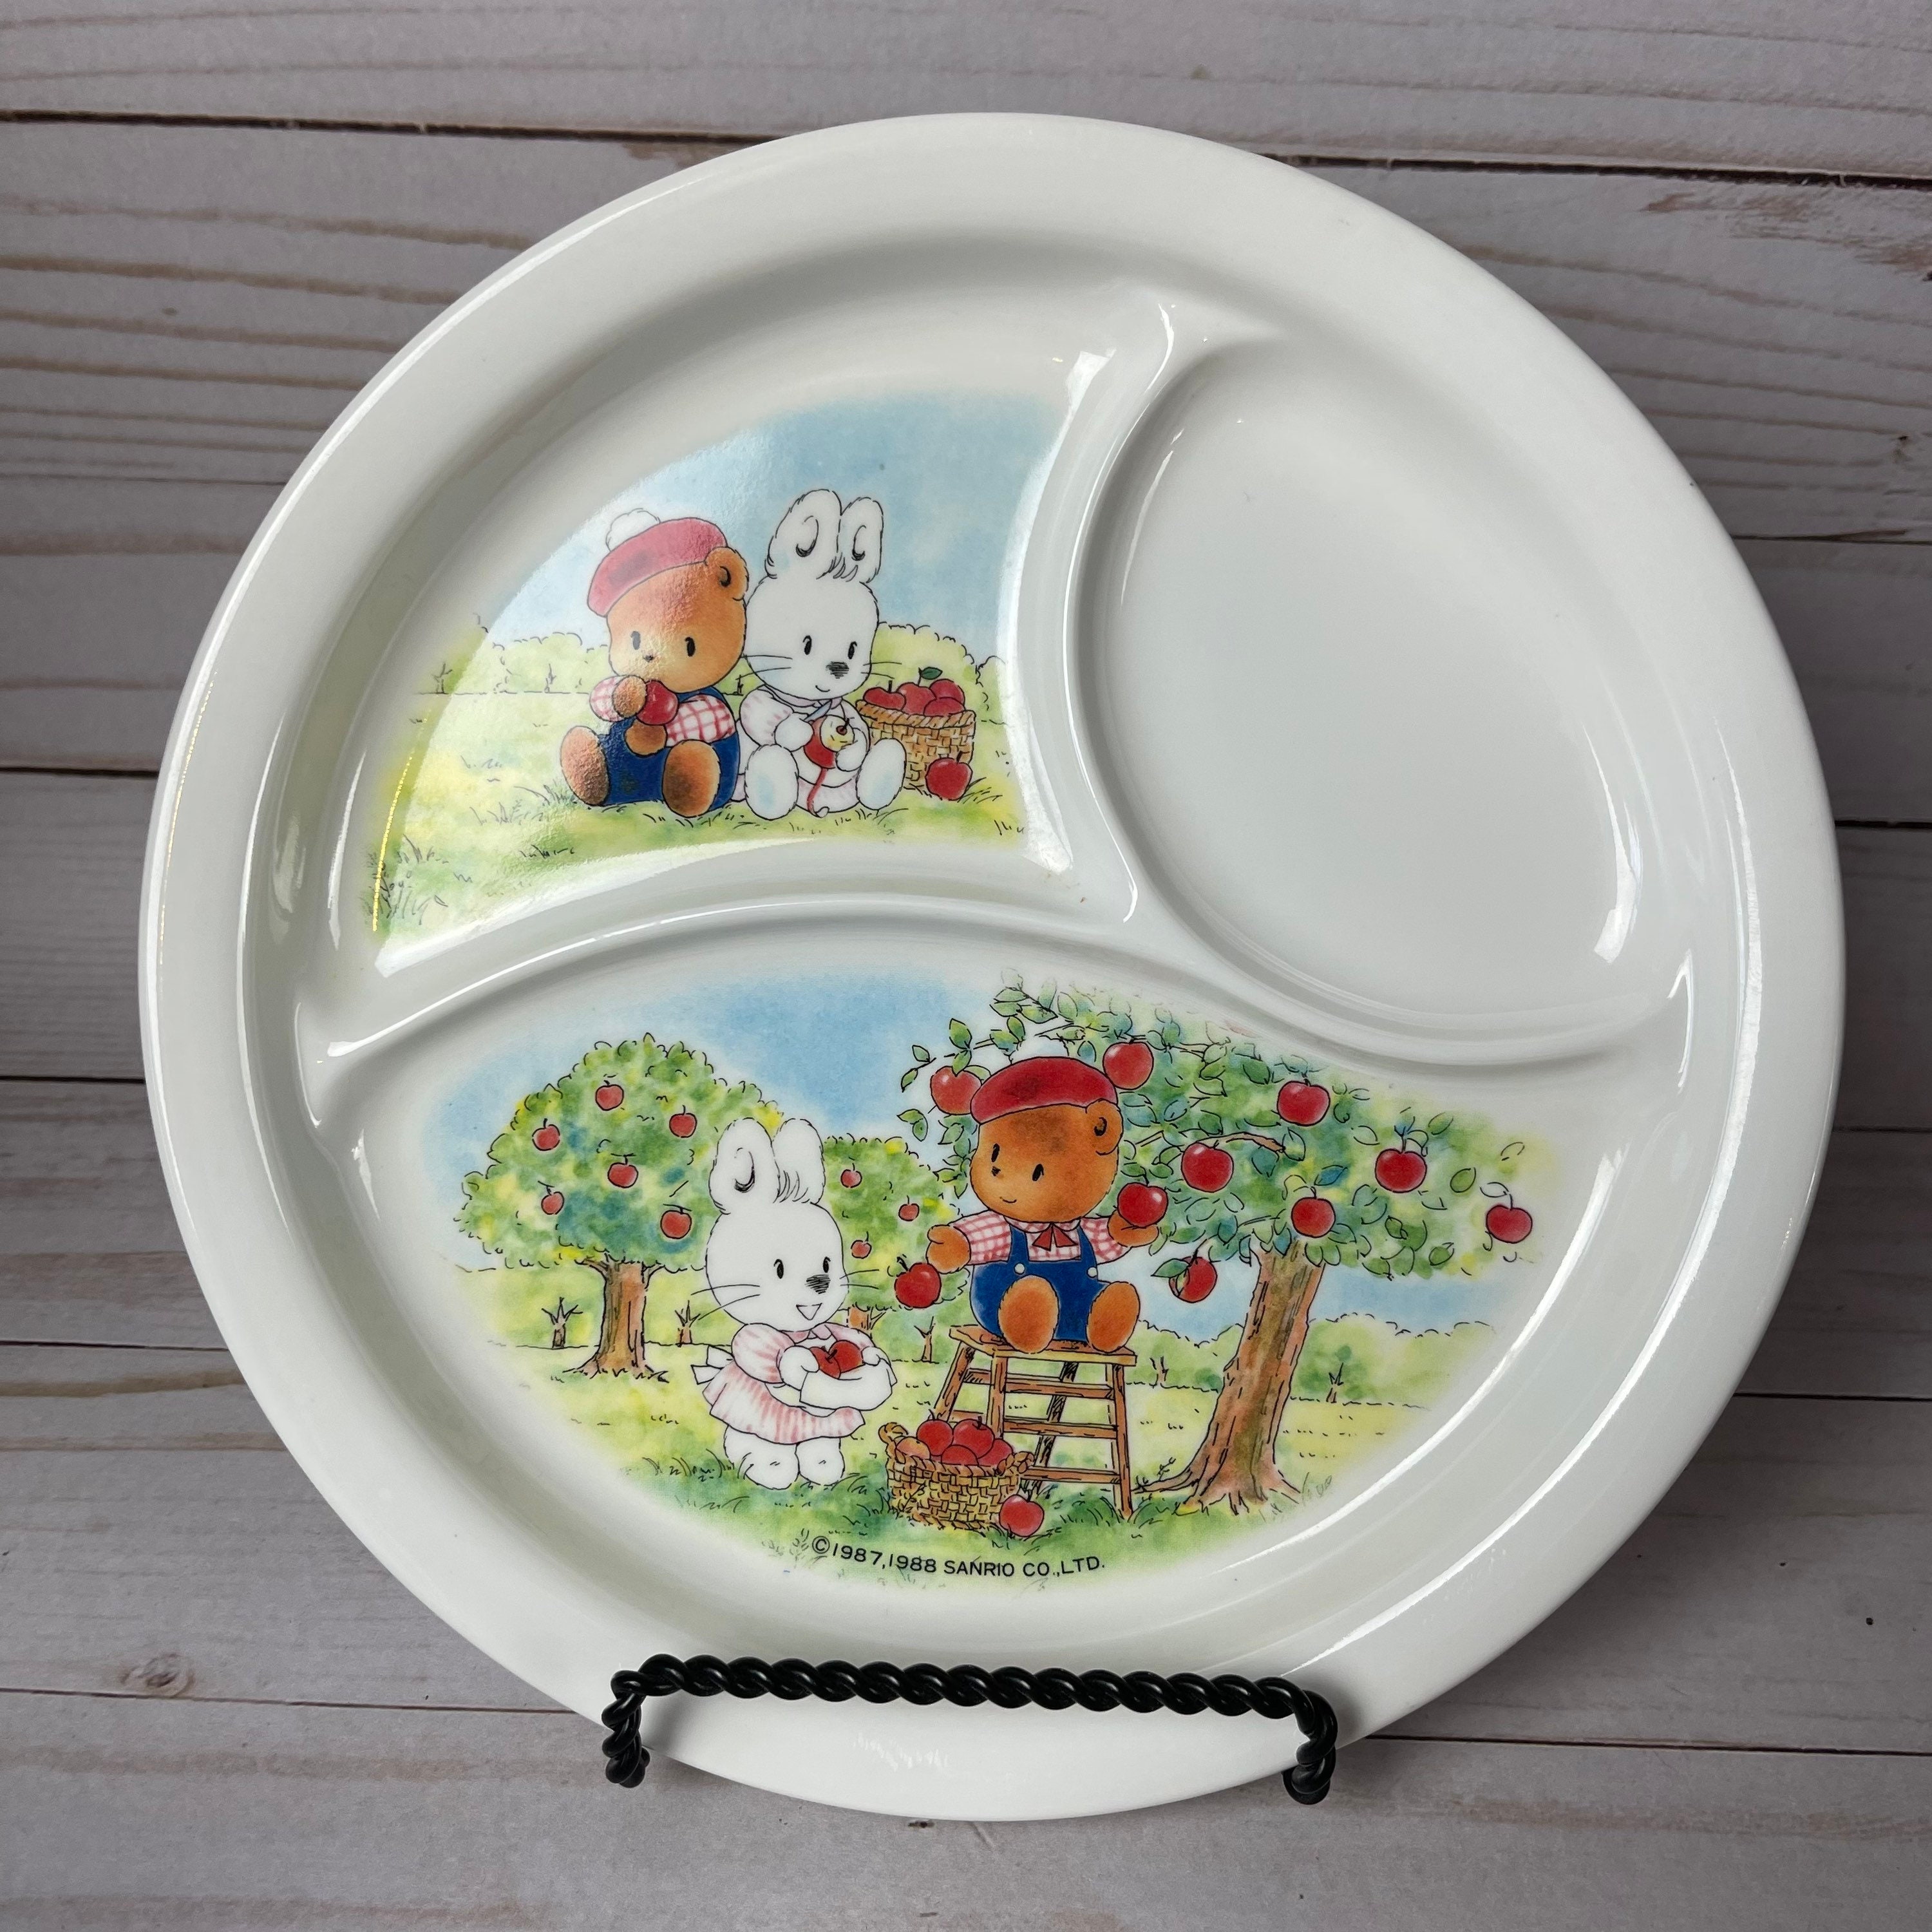 Daniel Tiger 5 PC Mealtime Feeding Set for Kids and Toddlers - Includes Plate, Bowl, Cup, Fork and Spoon Utensil Flatware - Durable, Dishwasher Safe